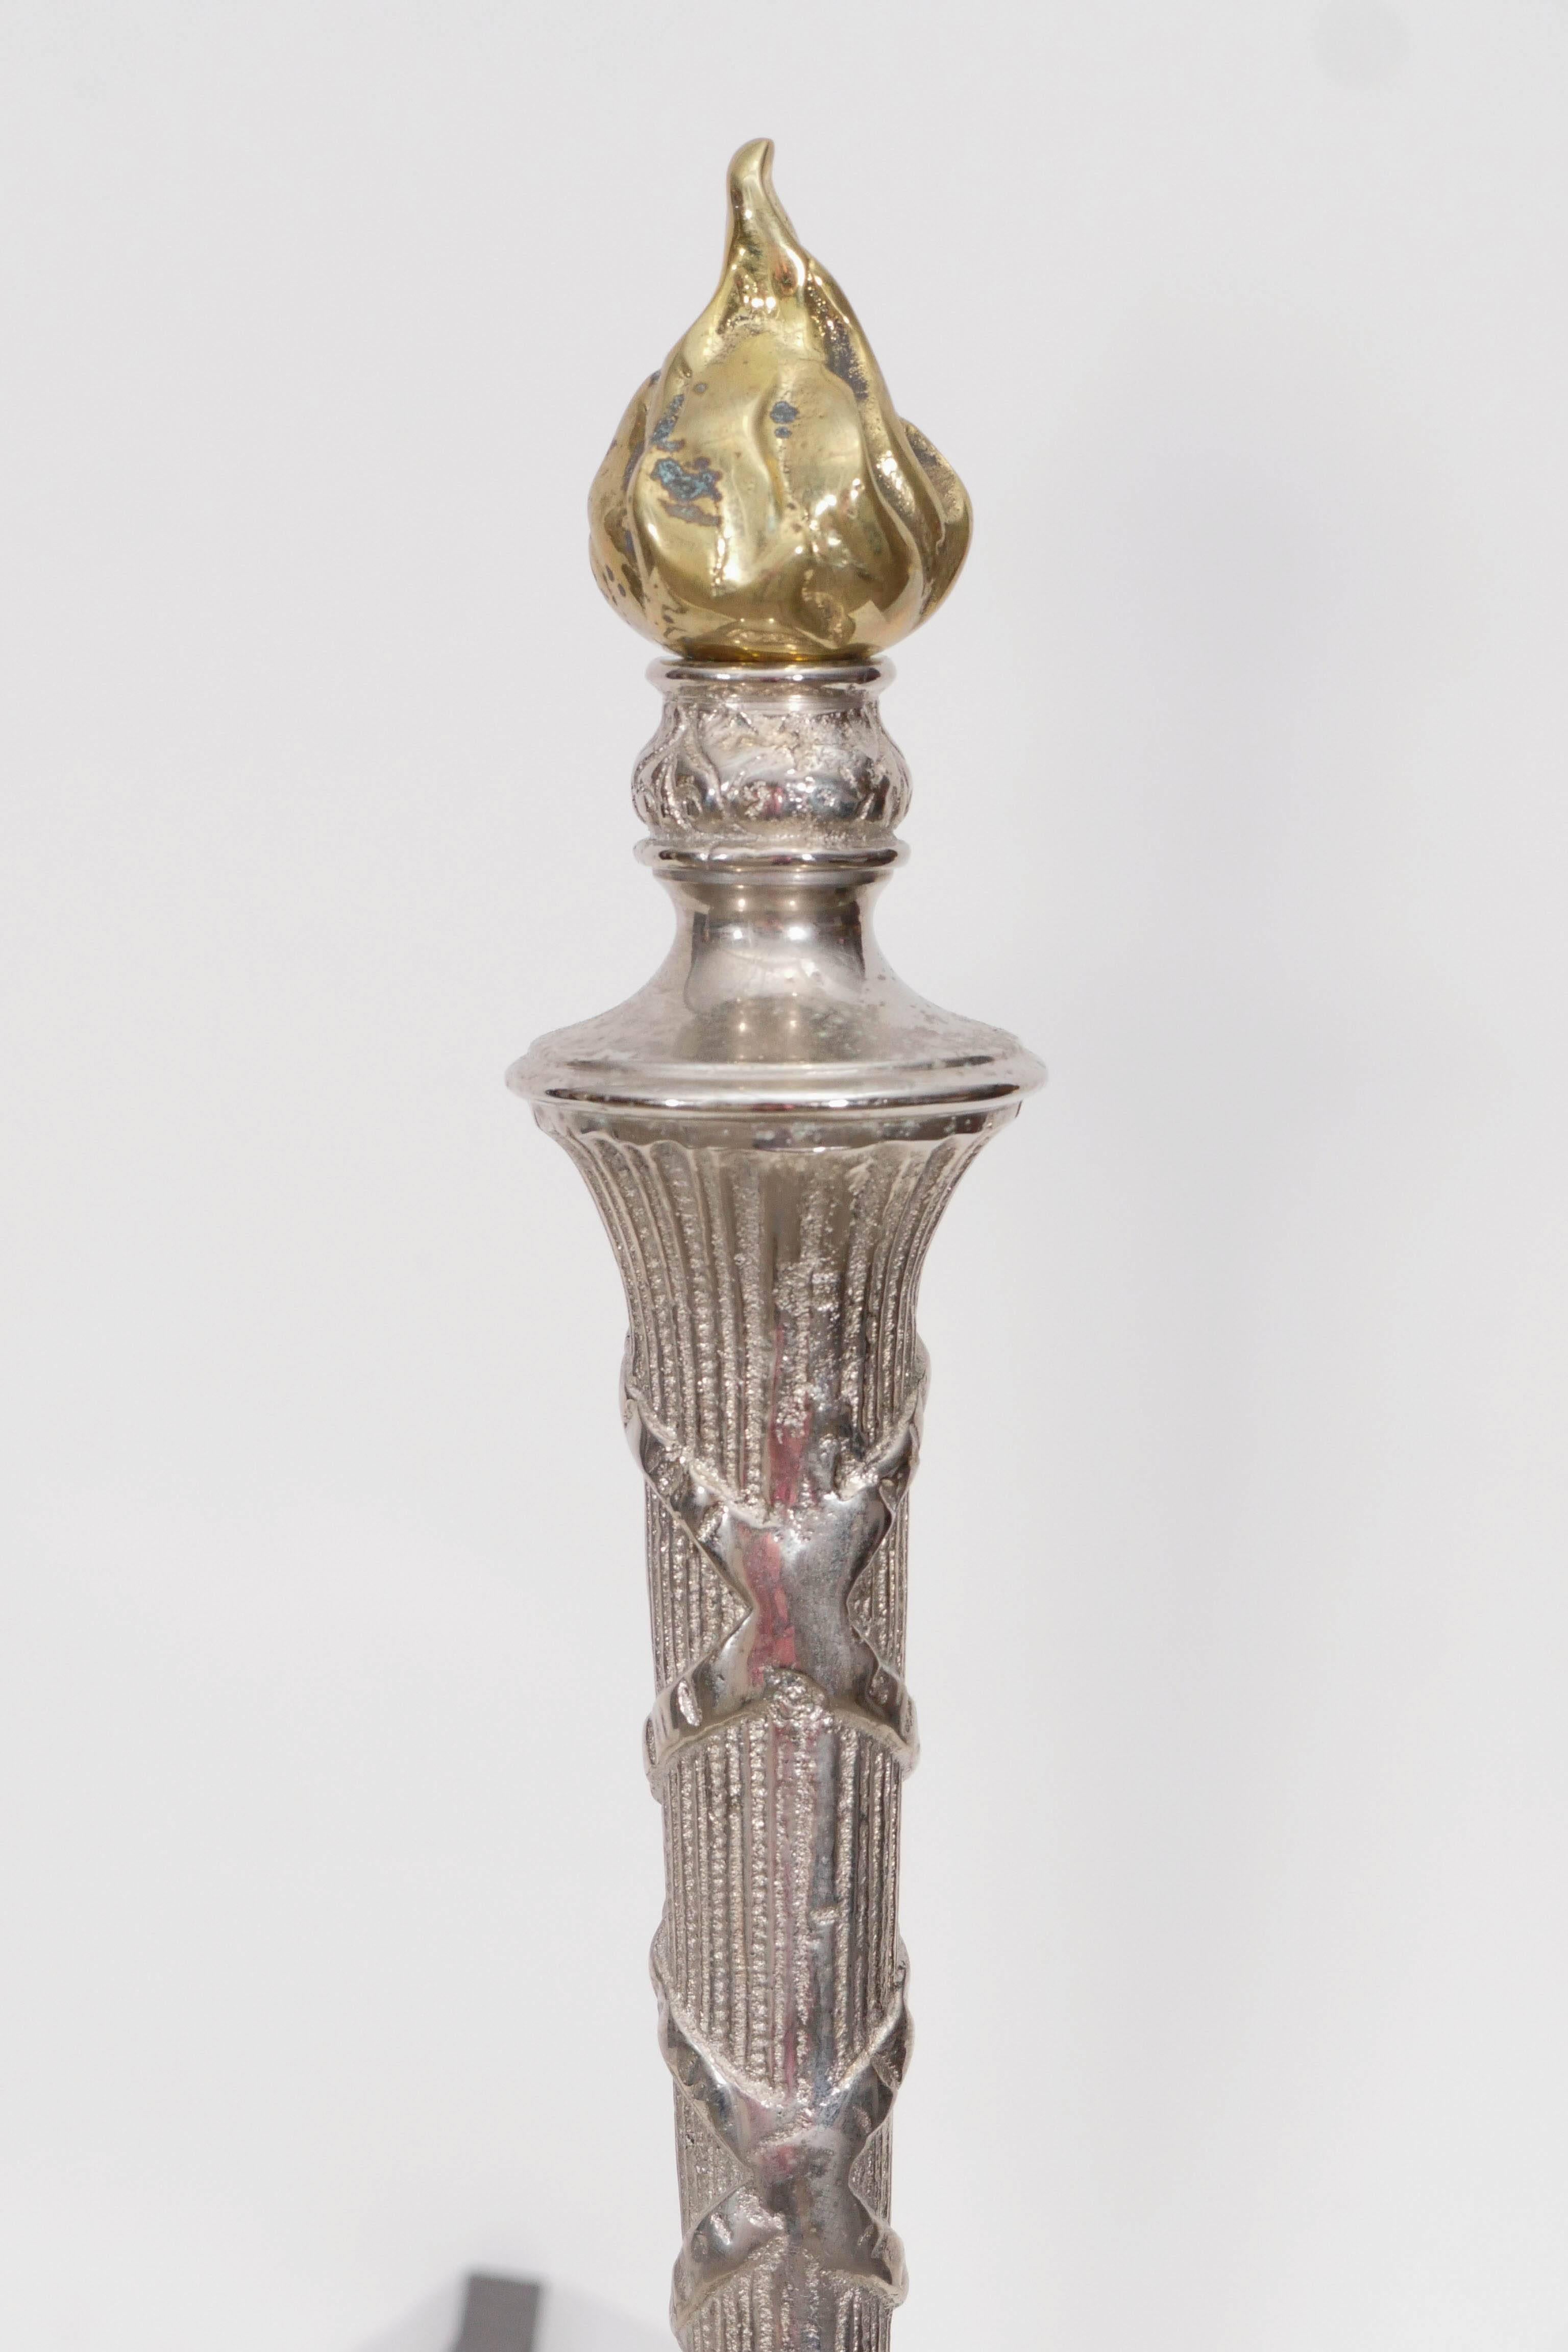 Art Deco 1940s Nickel Andirons with Brass Flame Finial For Sale